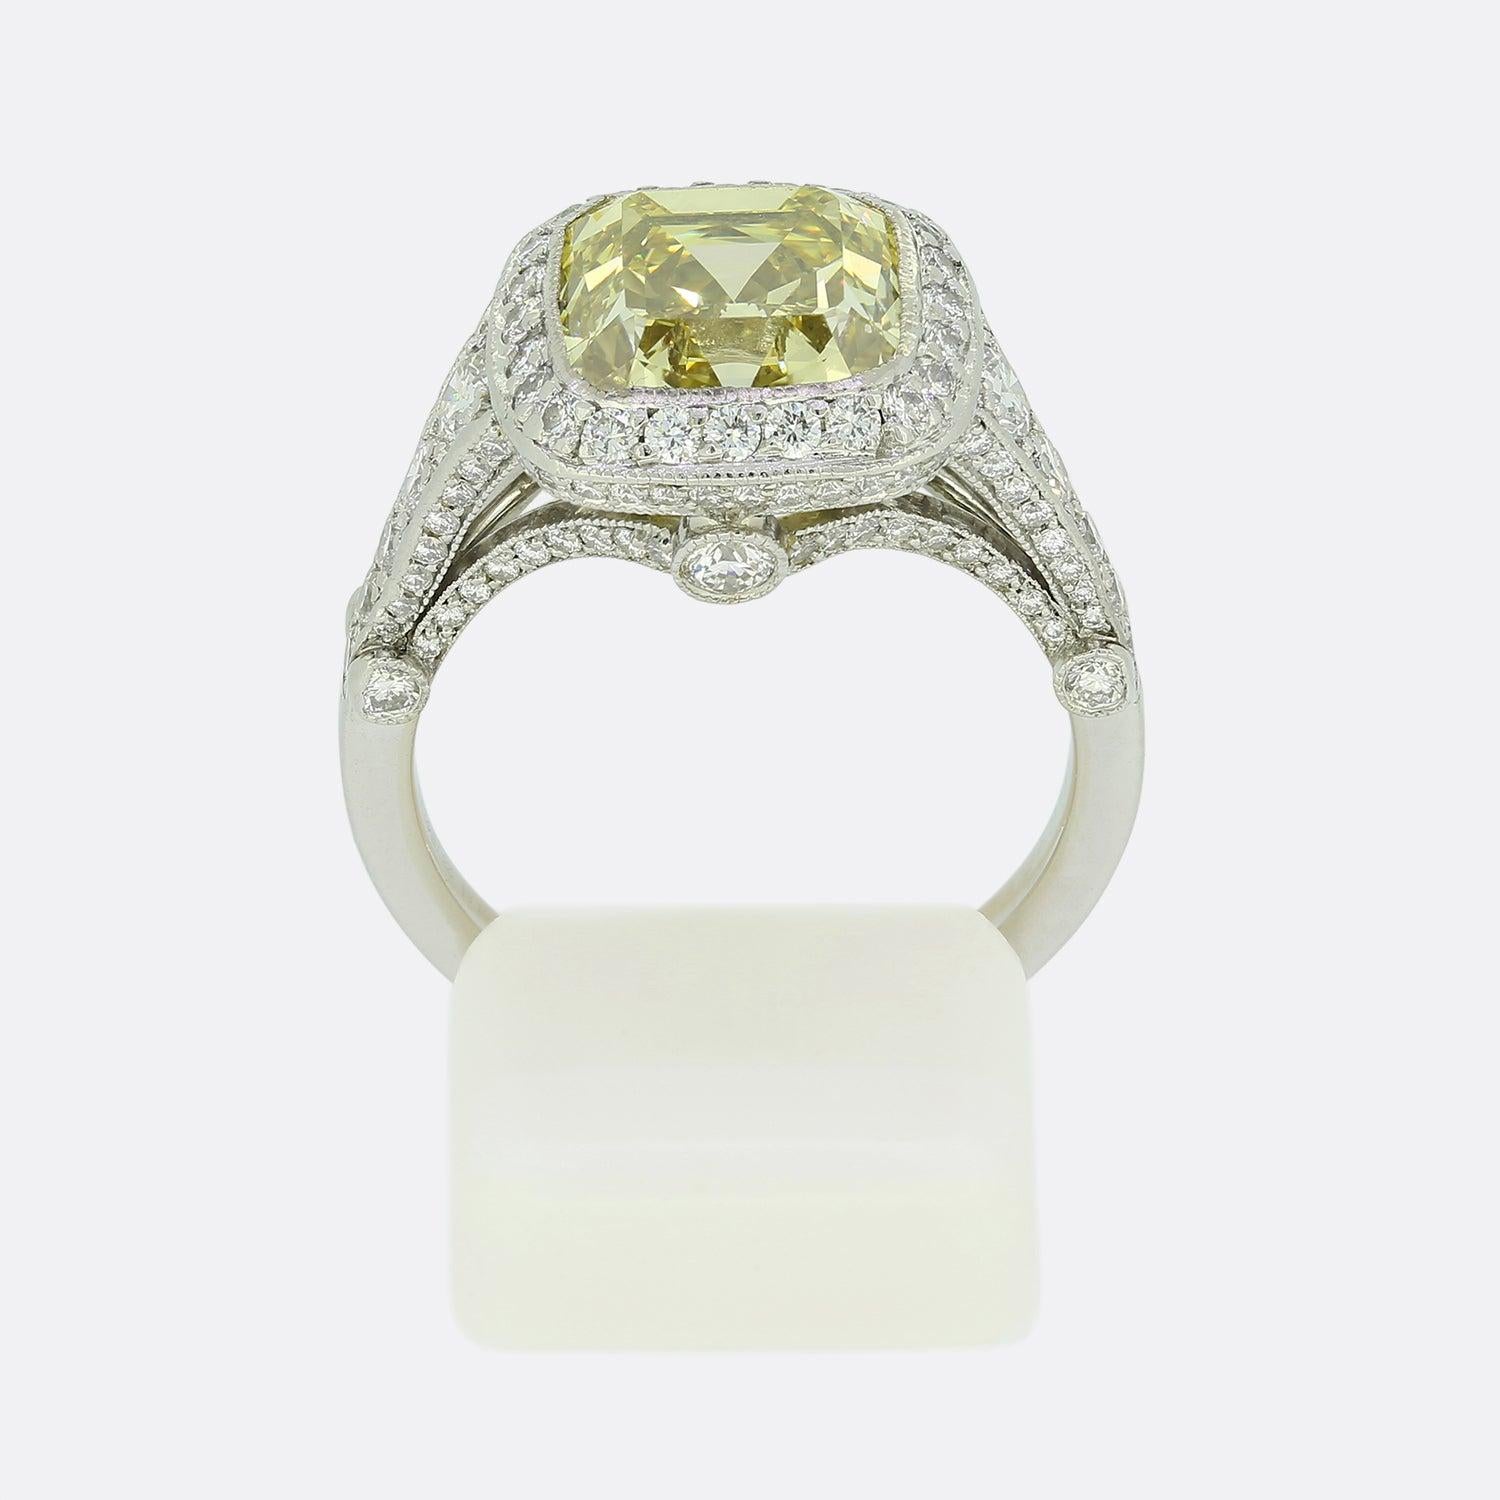 Tiffany & Co. Legacy 4.00 Carat Fancy Intense Yellow Diamond Engagement Ring For Sale 1